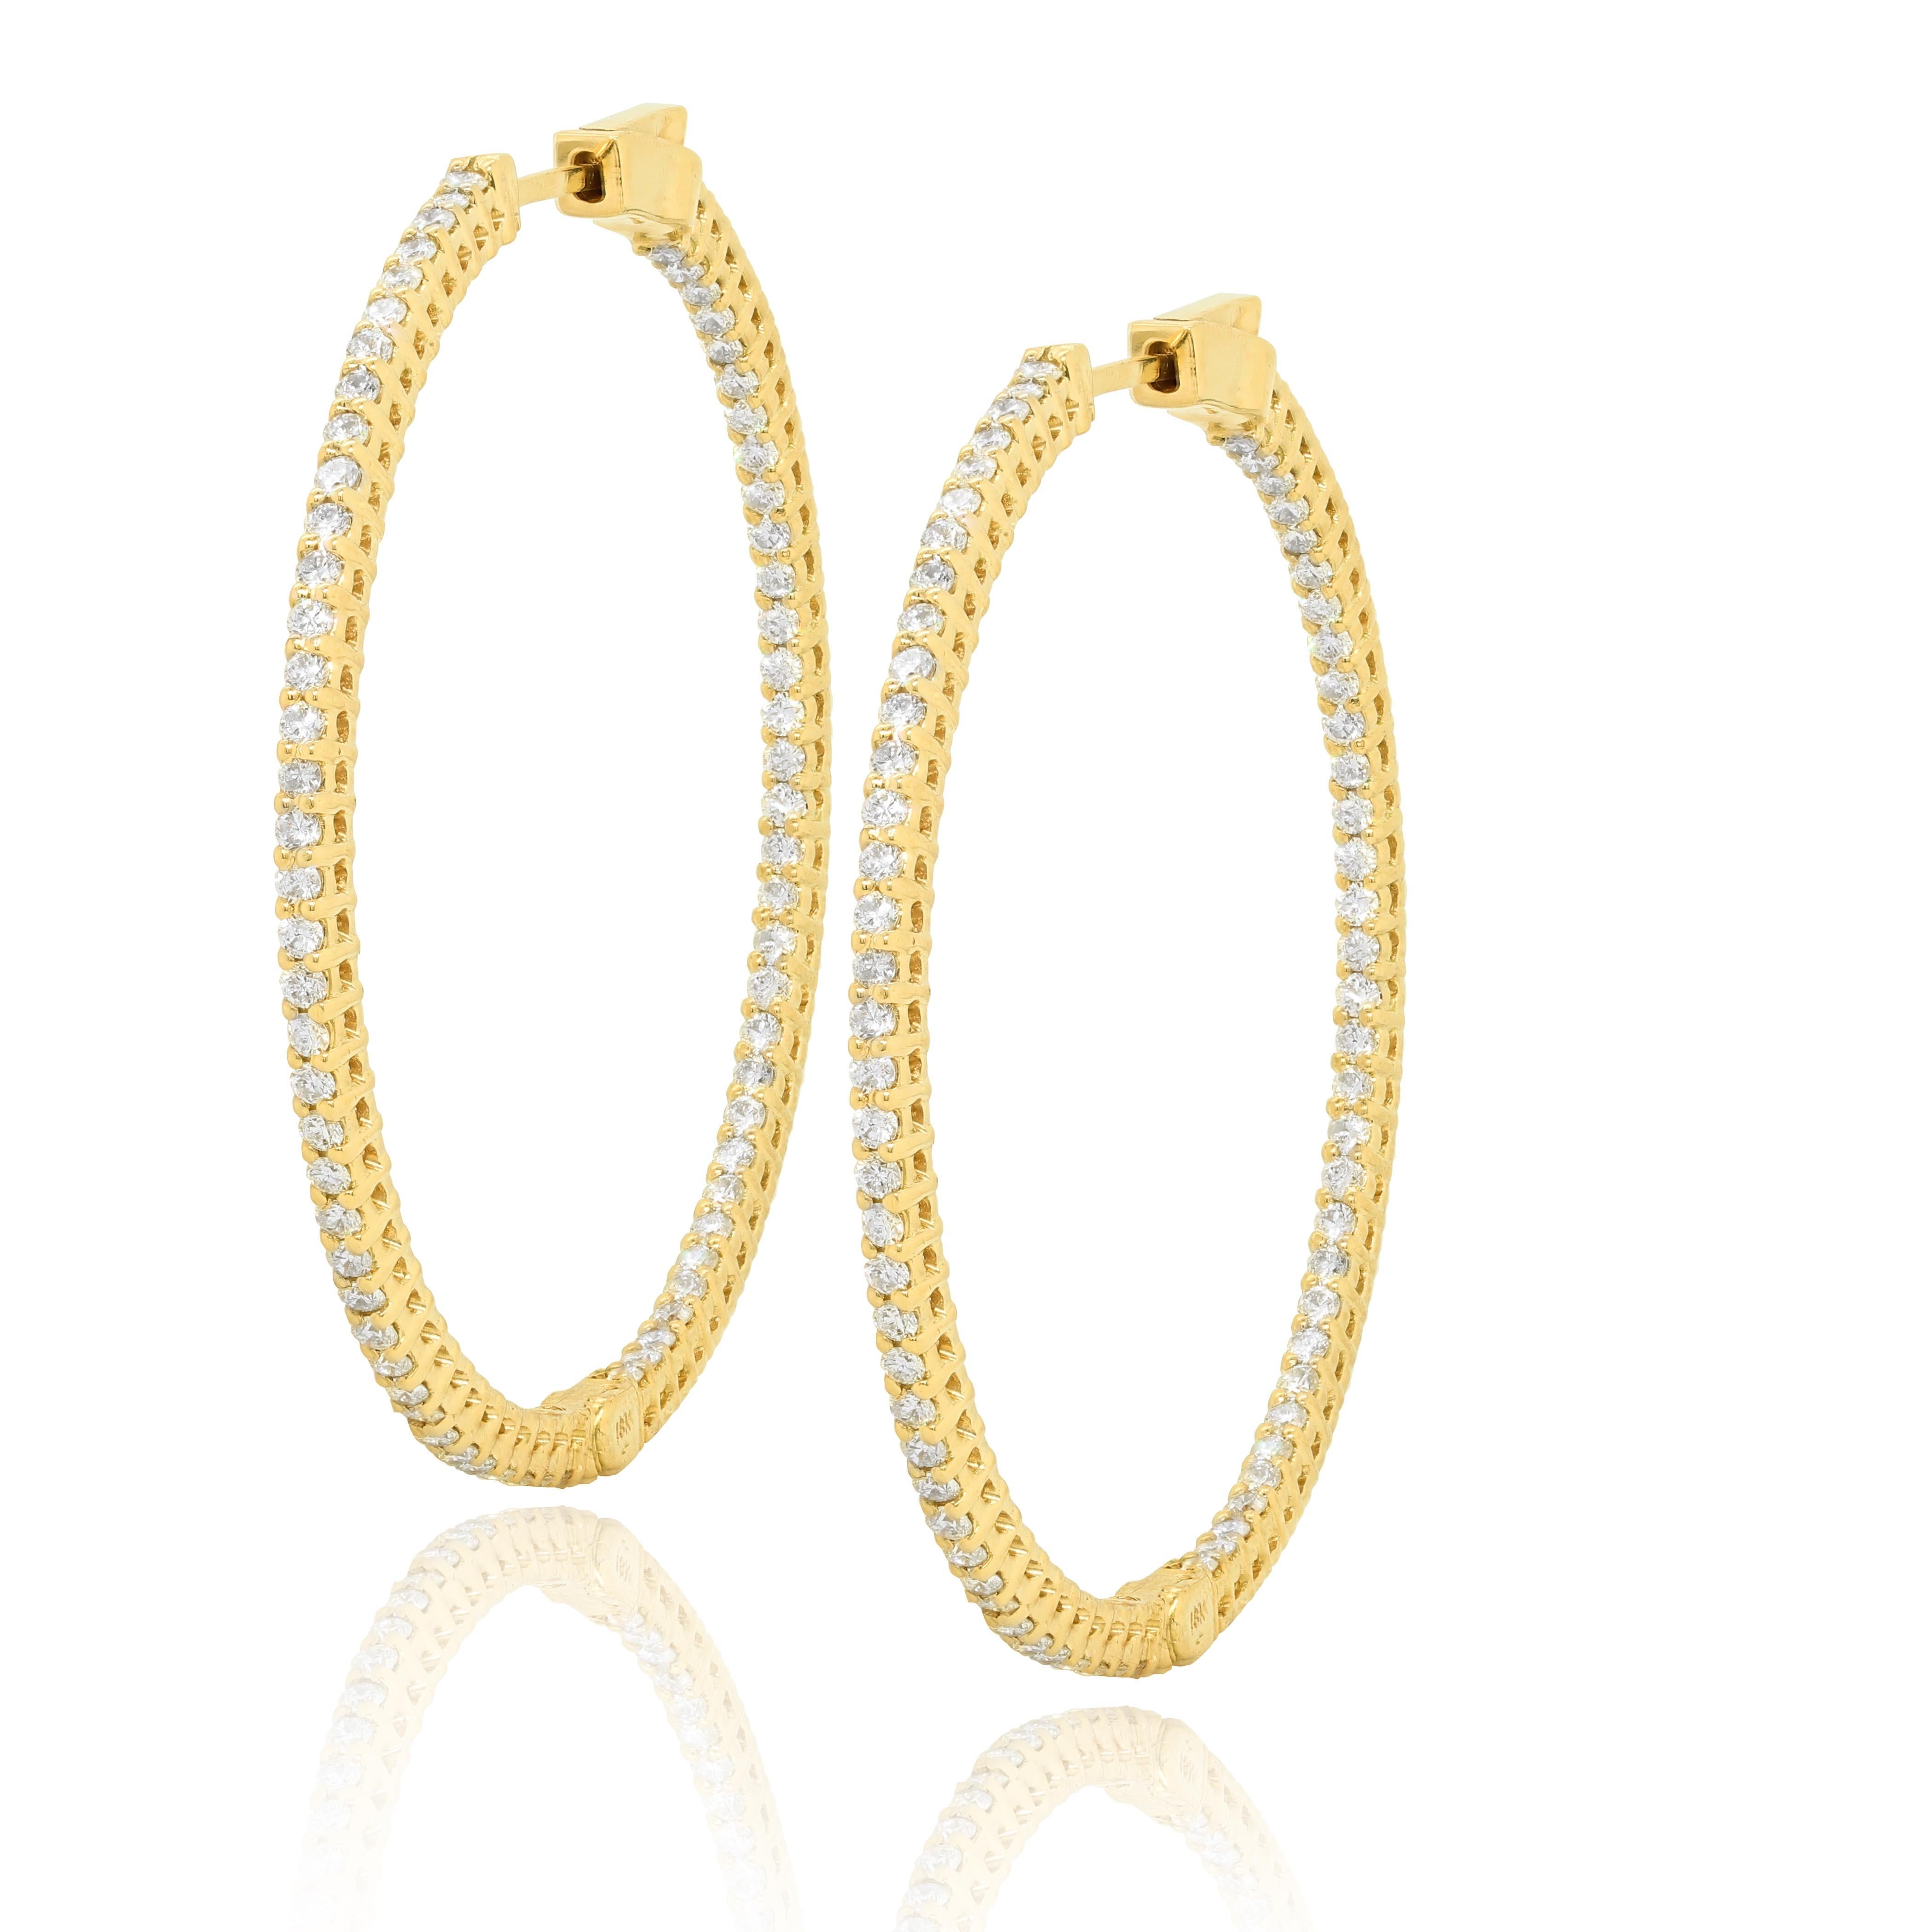 14K Yellow Gold Diamond Earrings featuring 1.50 Carats of Diamonds

Underline your look with this sharp 14K Yellow gold shape Diamond Earrings. High quality Diamonds. This Earrings will underline your exquisite look for any occasion.

. is a leading